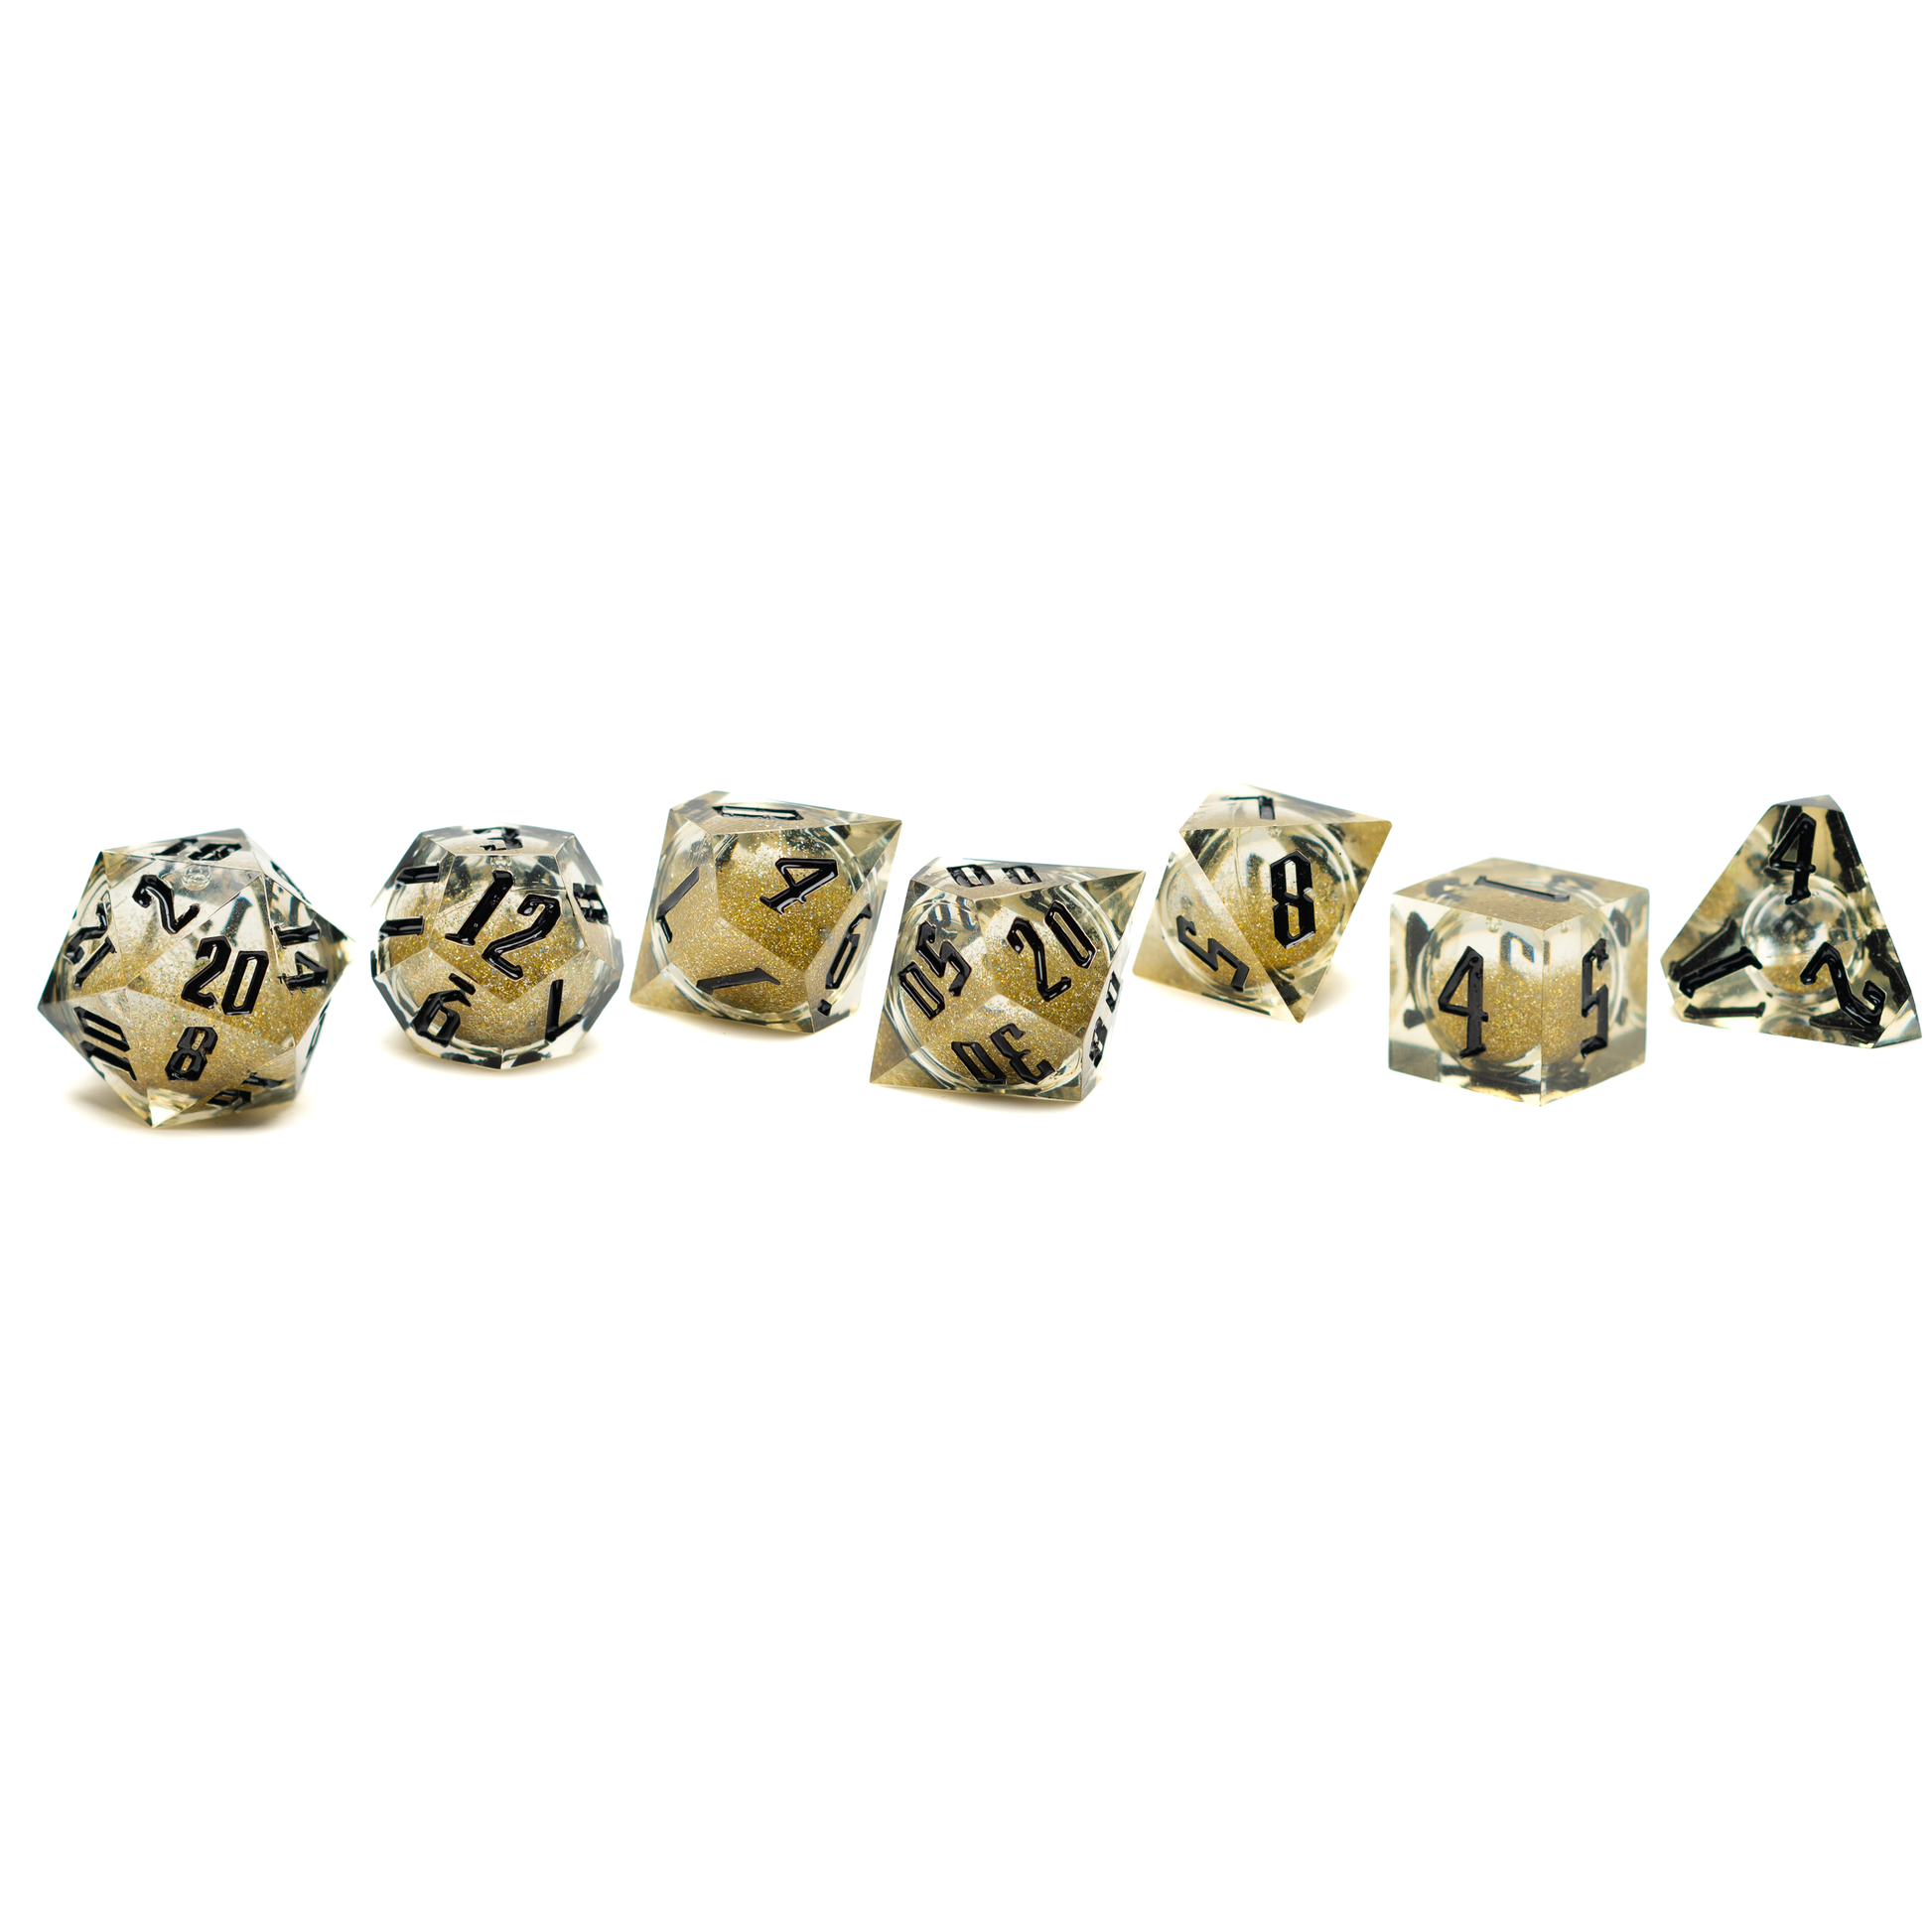 Roll Britannia Sharp Edge Resin Liquid Core Dungeons and Dragons Dice Set with Gold Glitter Aesthetic